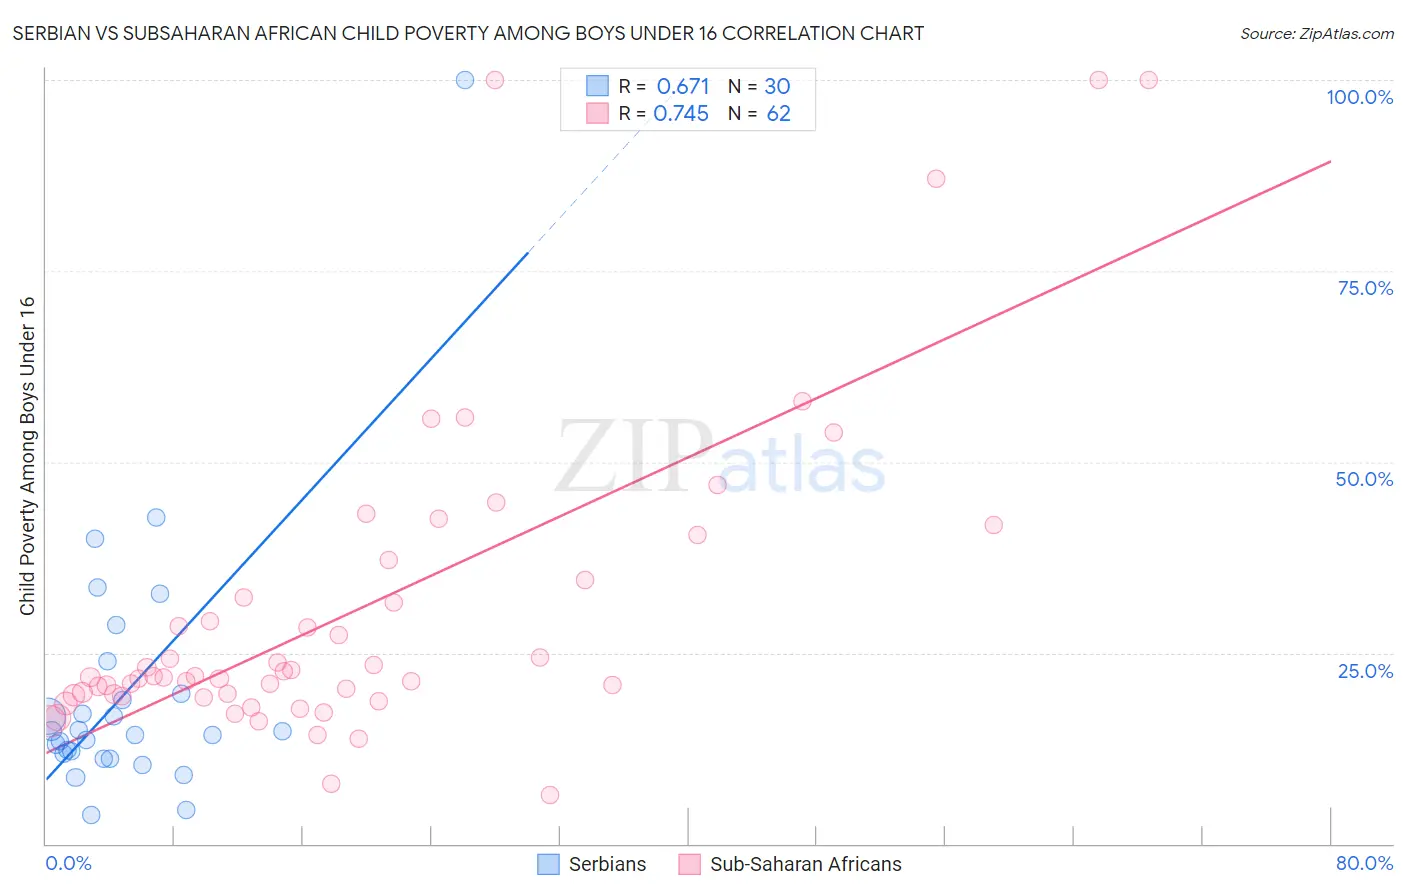 Serbian vs Subsaharan African Child Poverty Among Boys Under 16